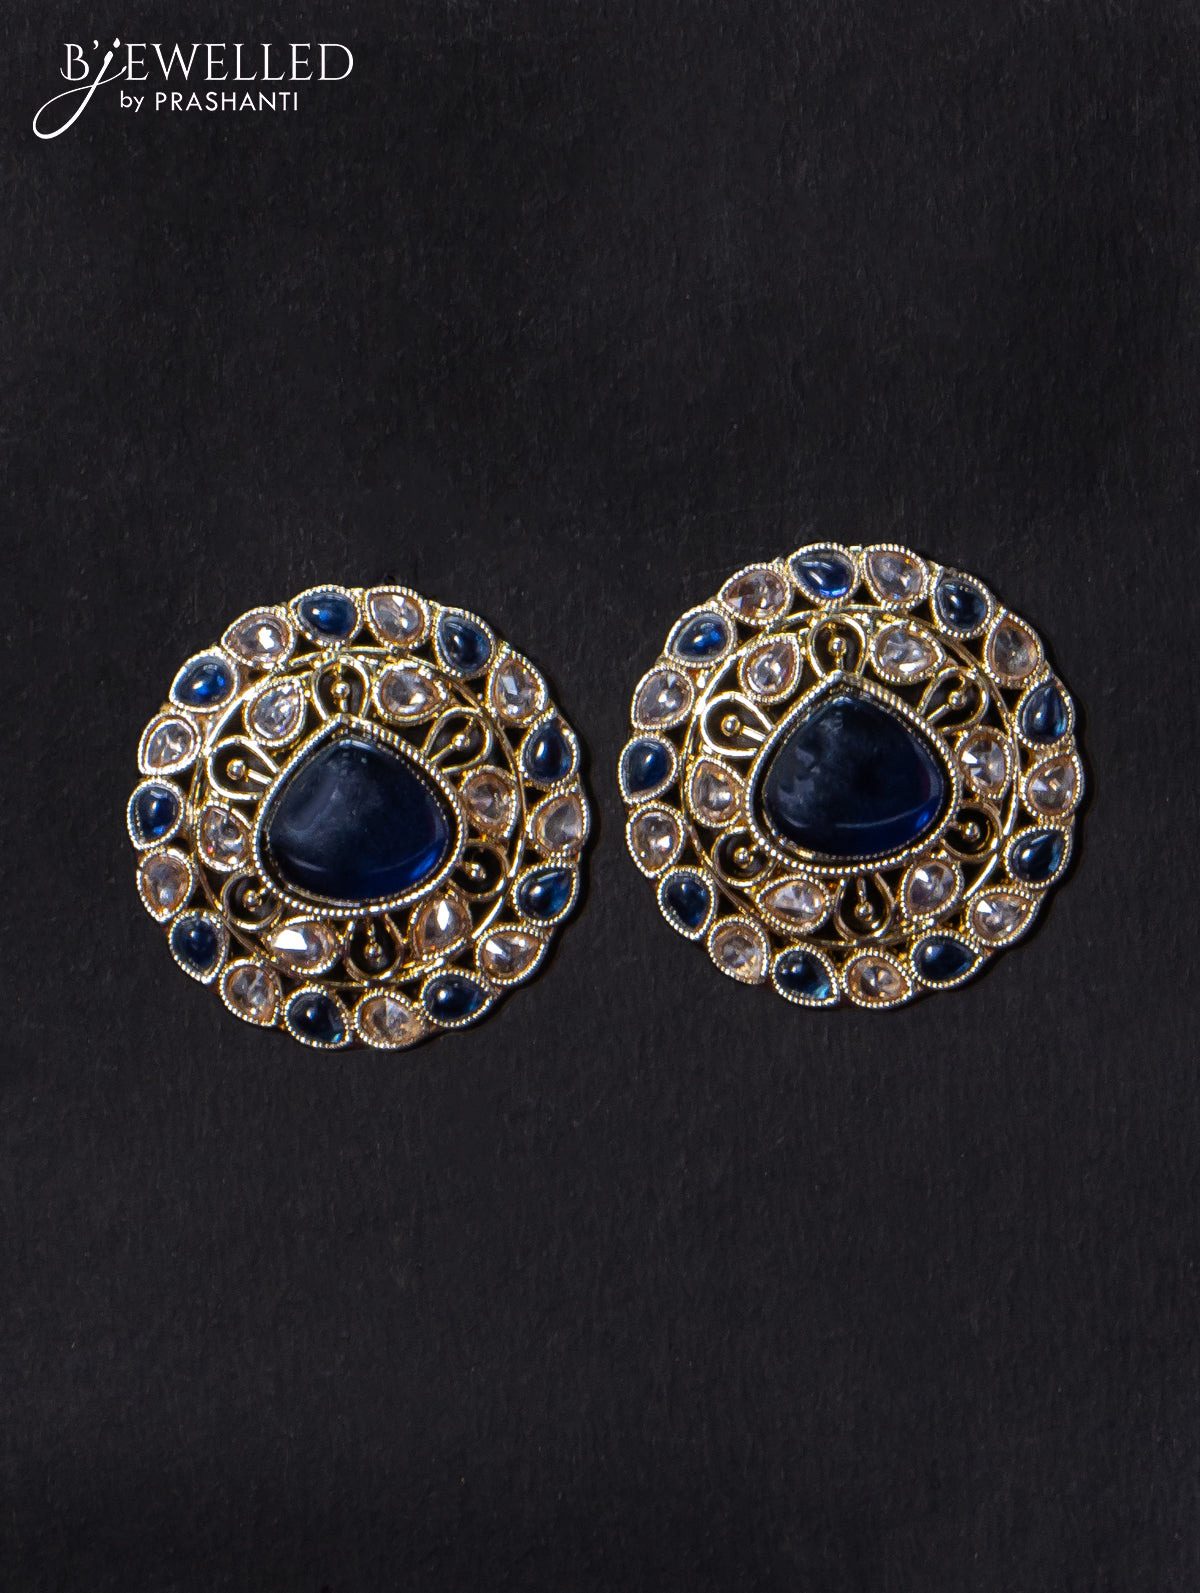 Light weight earrings with cz and sapphire stone